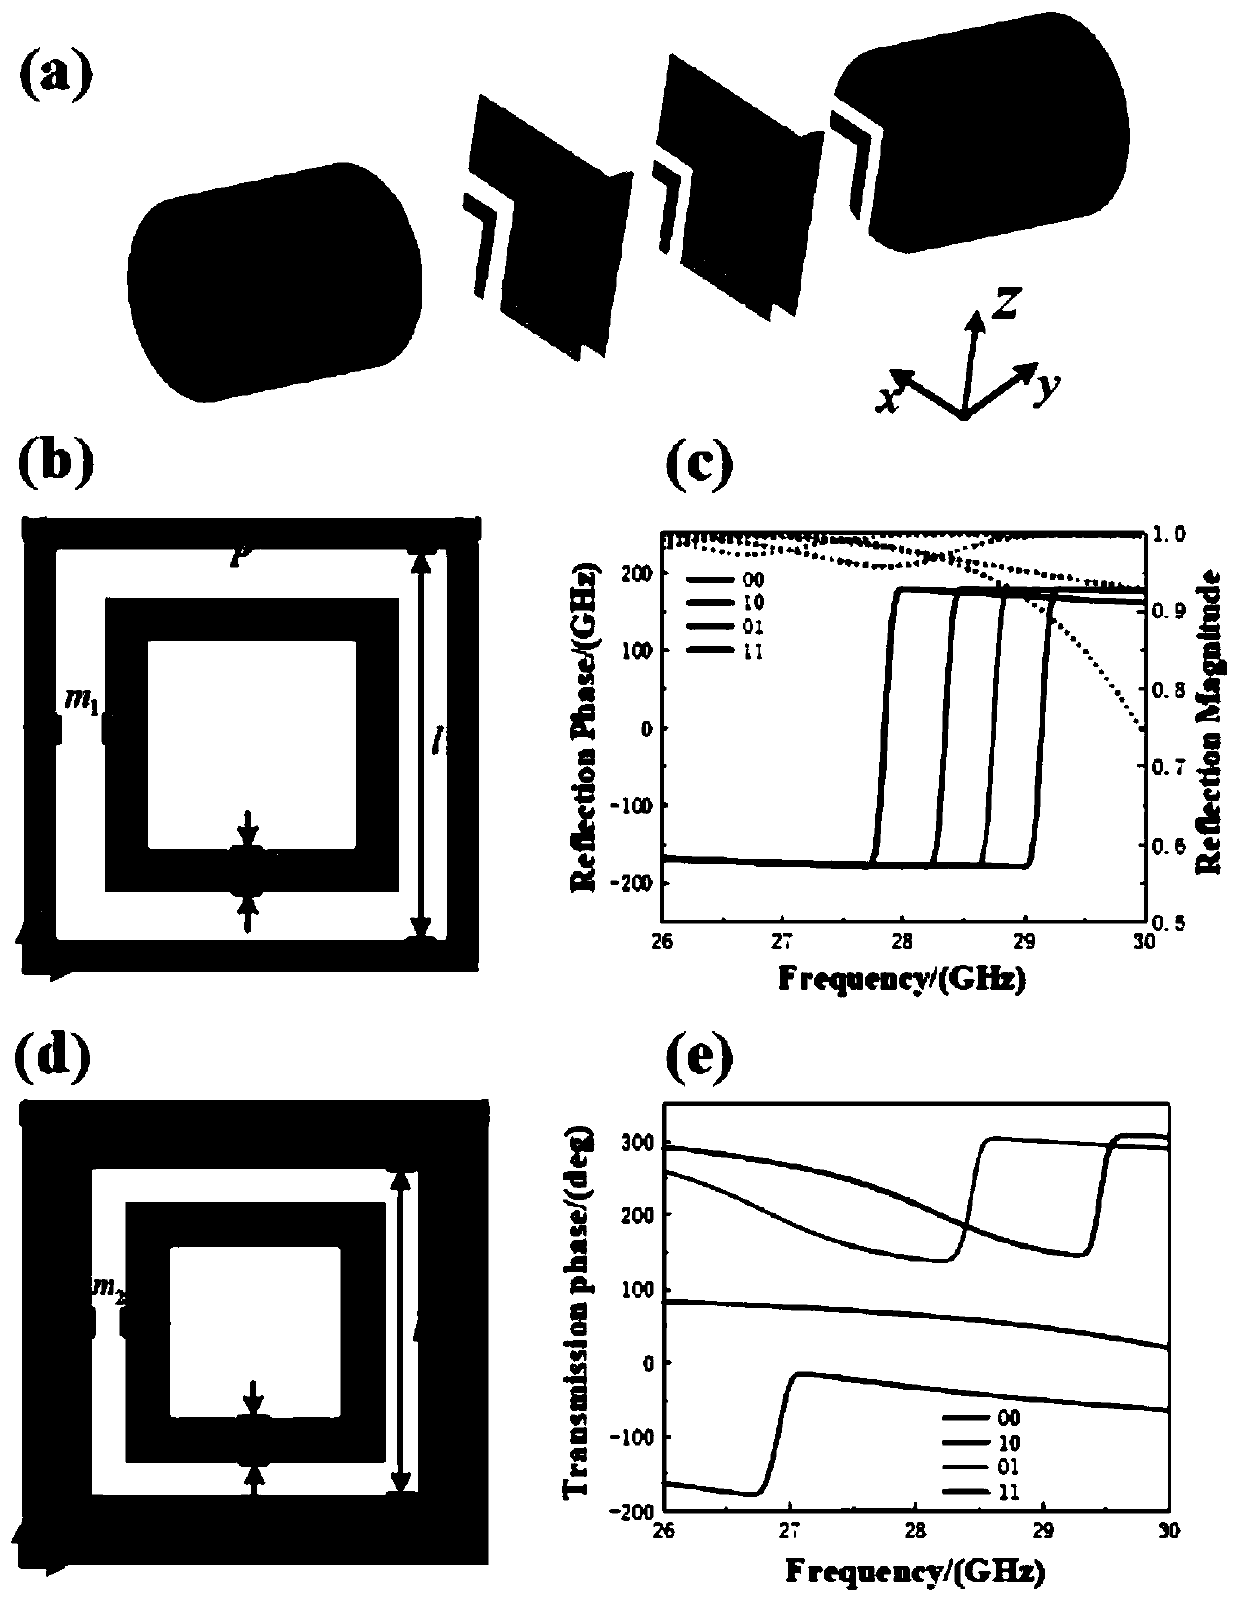 Low-profile holographic imaging antenna based on Fabry-Perot resonant cavity structure